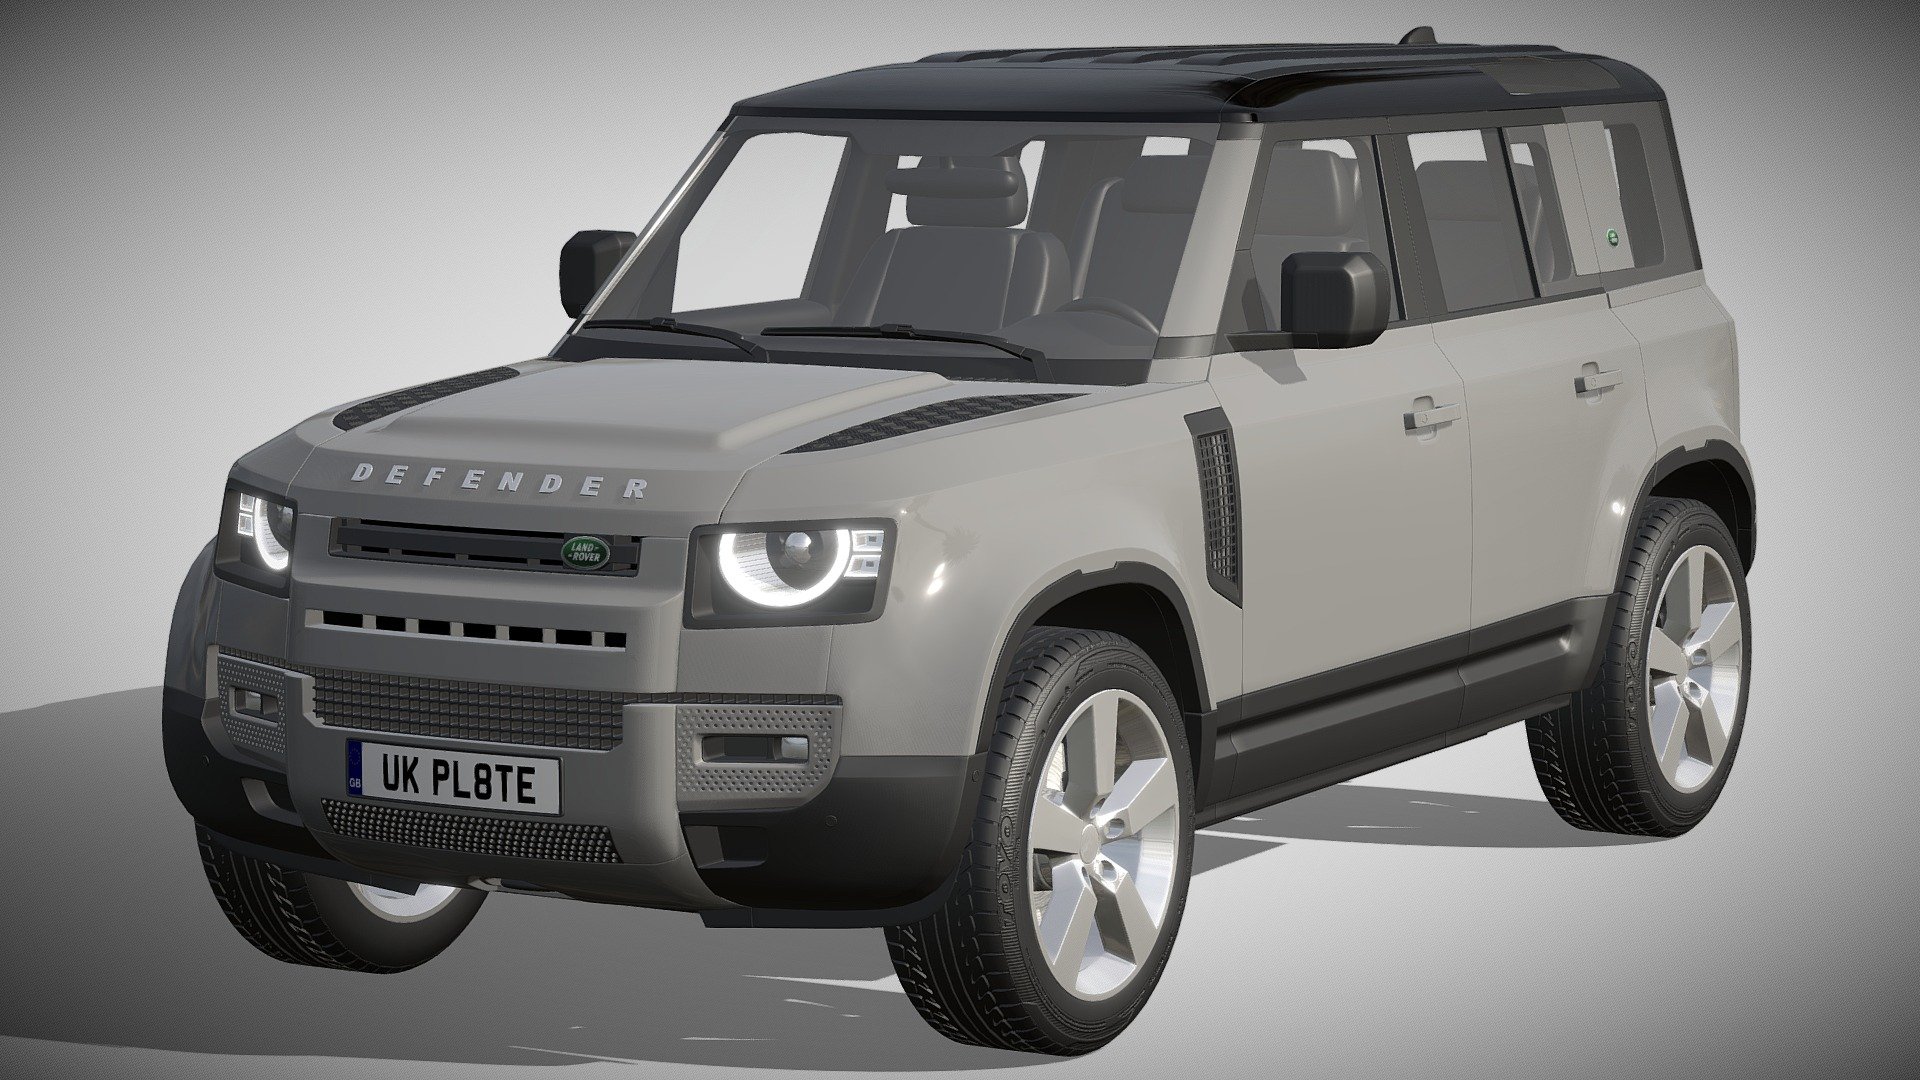 Land Rover Defender 110 2020

https://www.landrover.com/vehicles/defender/index.html

Clean geometry Light weight model, yet completely detailed for HI-Res renders. Use for movies, Advertisements or games

Corona render and materials

All textures include in *.rar files

Lighting setup is not included in the file! - Land Rover Defender 110 2020 - Buy Royalty Free 3D model by zifir3d 3d model